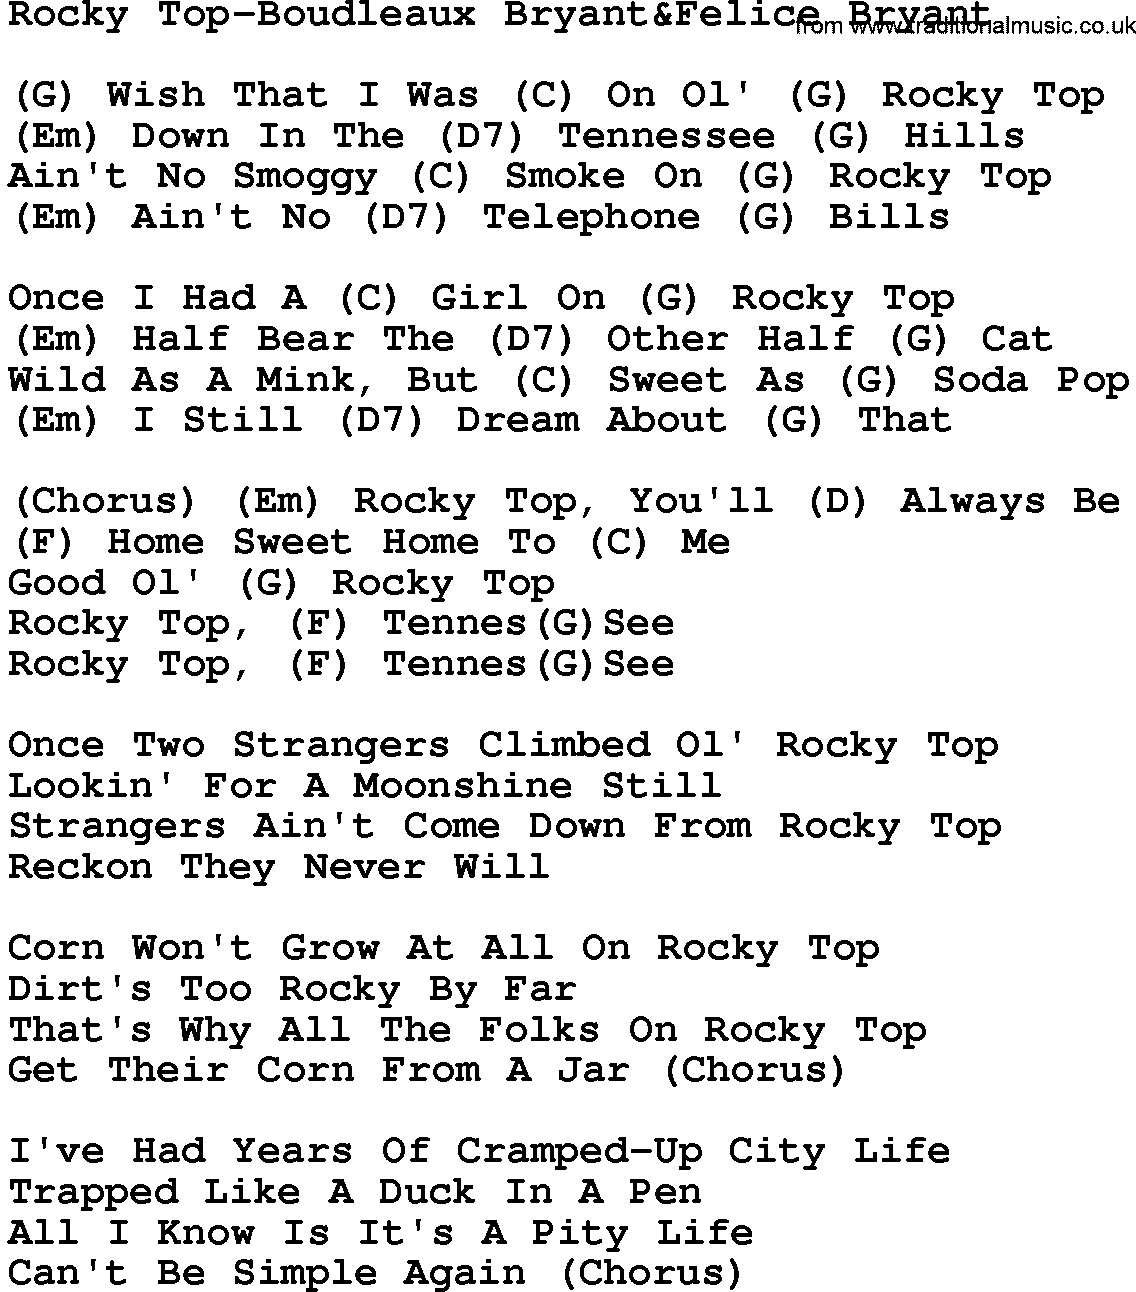 Country music song: Rocky Top-Boudleaux Bryan&Felice Bryant lyrics and chords